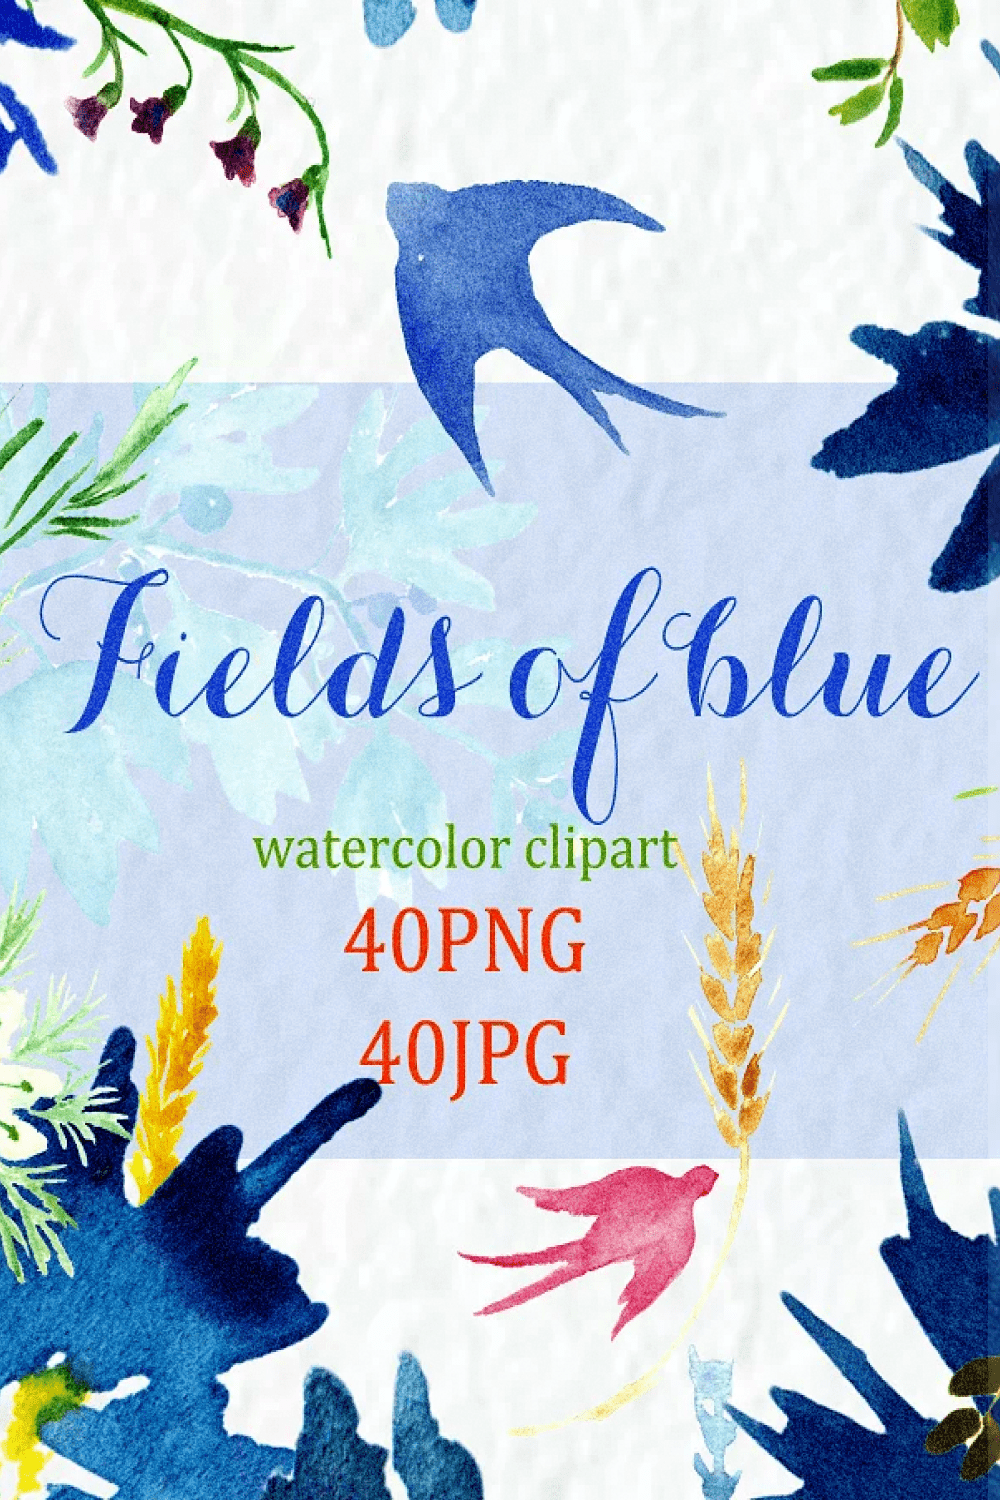 Fields of blue watercolor clipart - pinterest image preview.